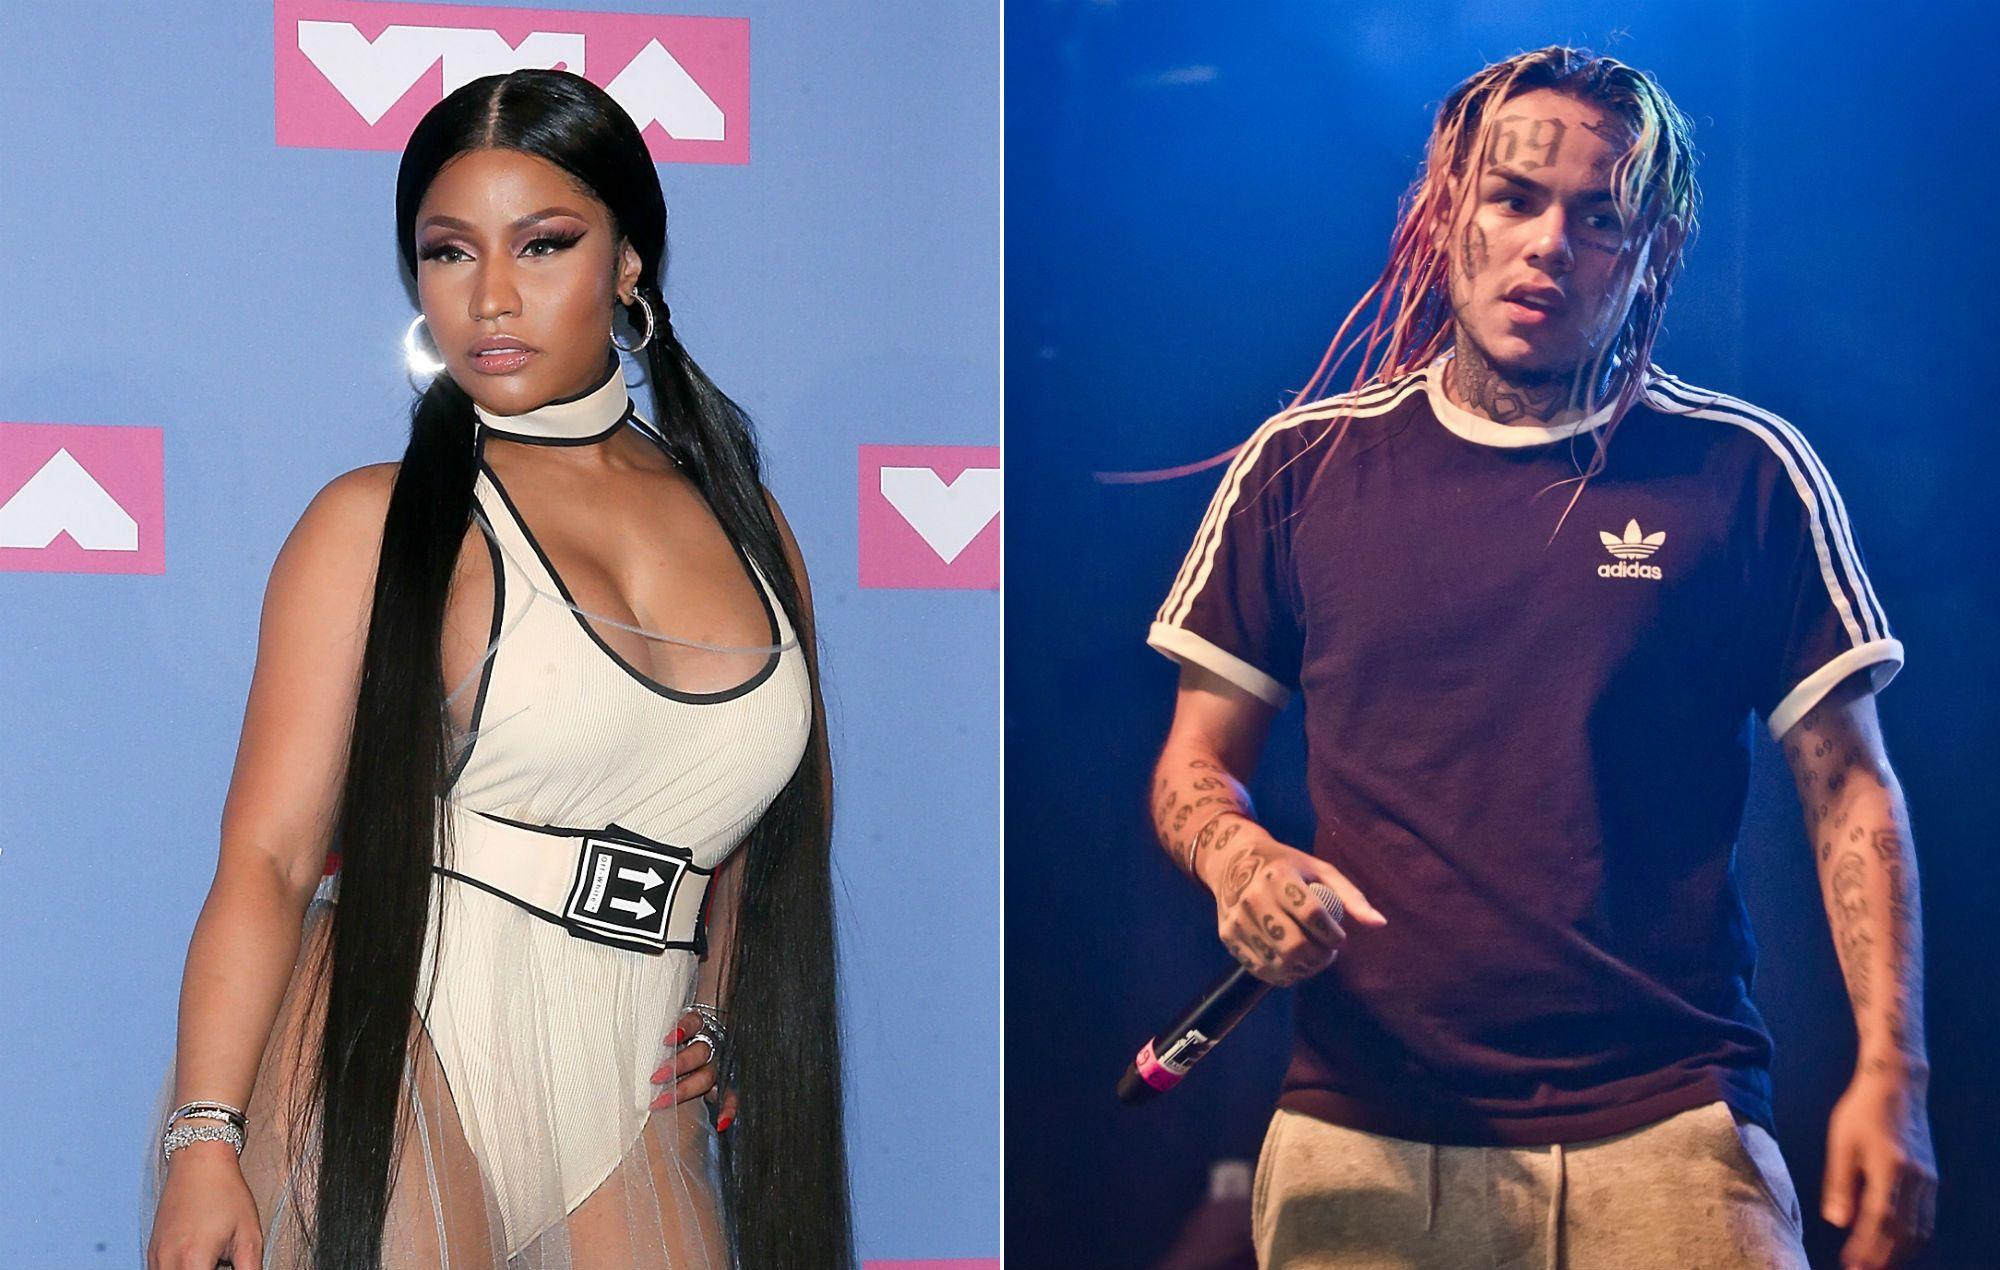 Nicki Minaj was not allowed to perform with 6ix9ine at the MTV VMAs